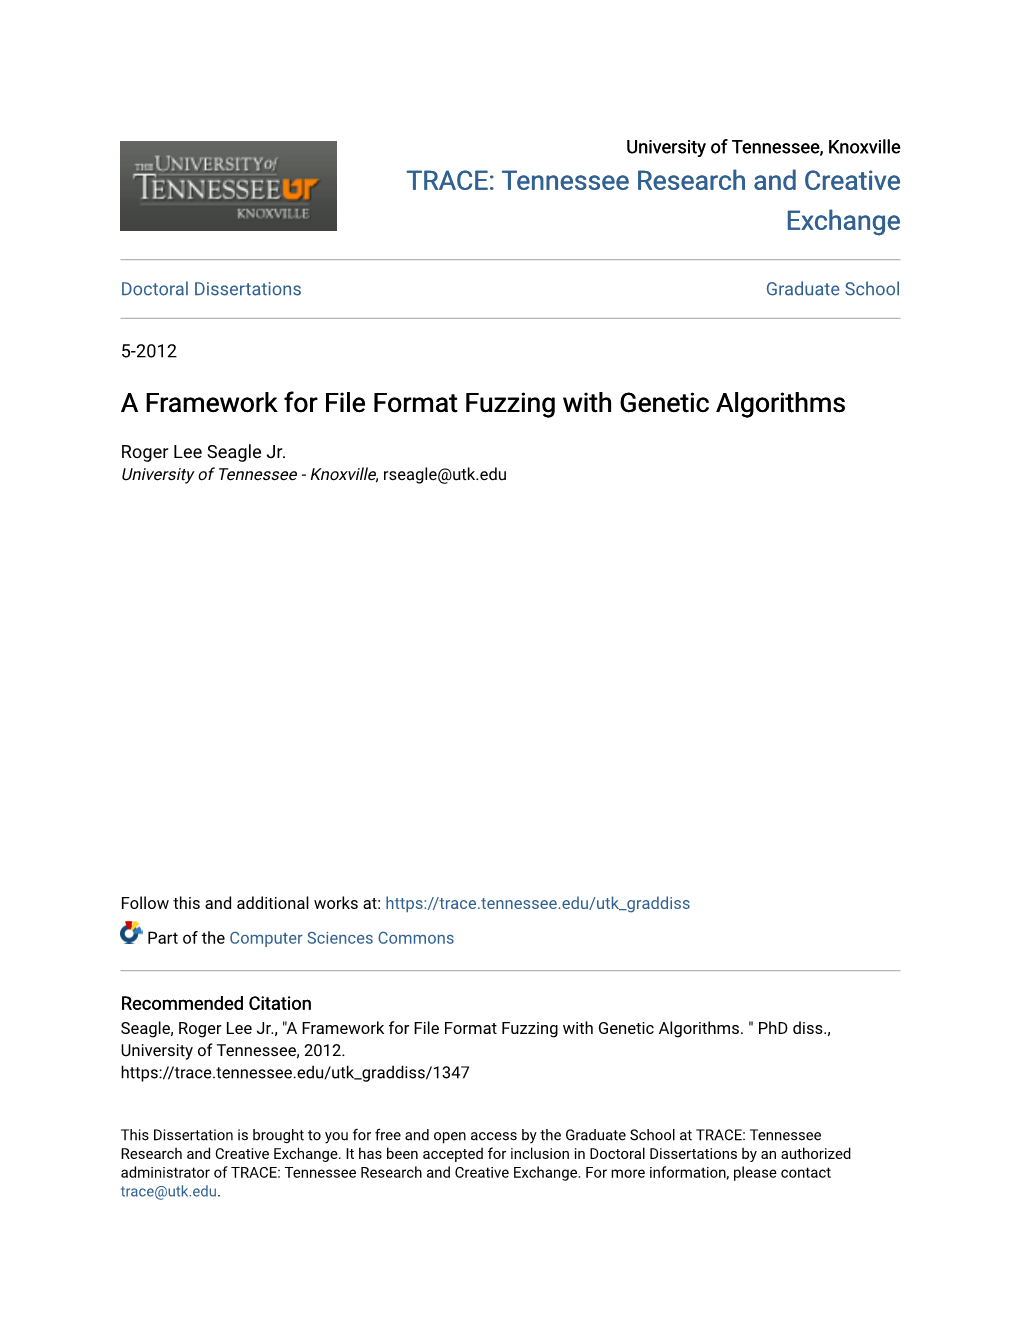 A Framework for File Format Fuzzing with Genetic Algorithms